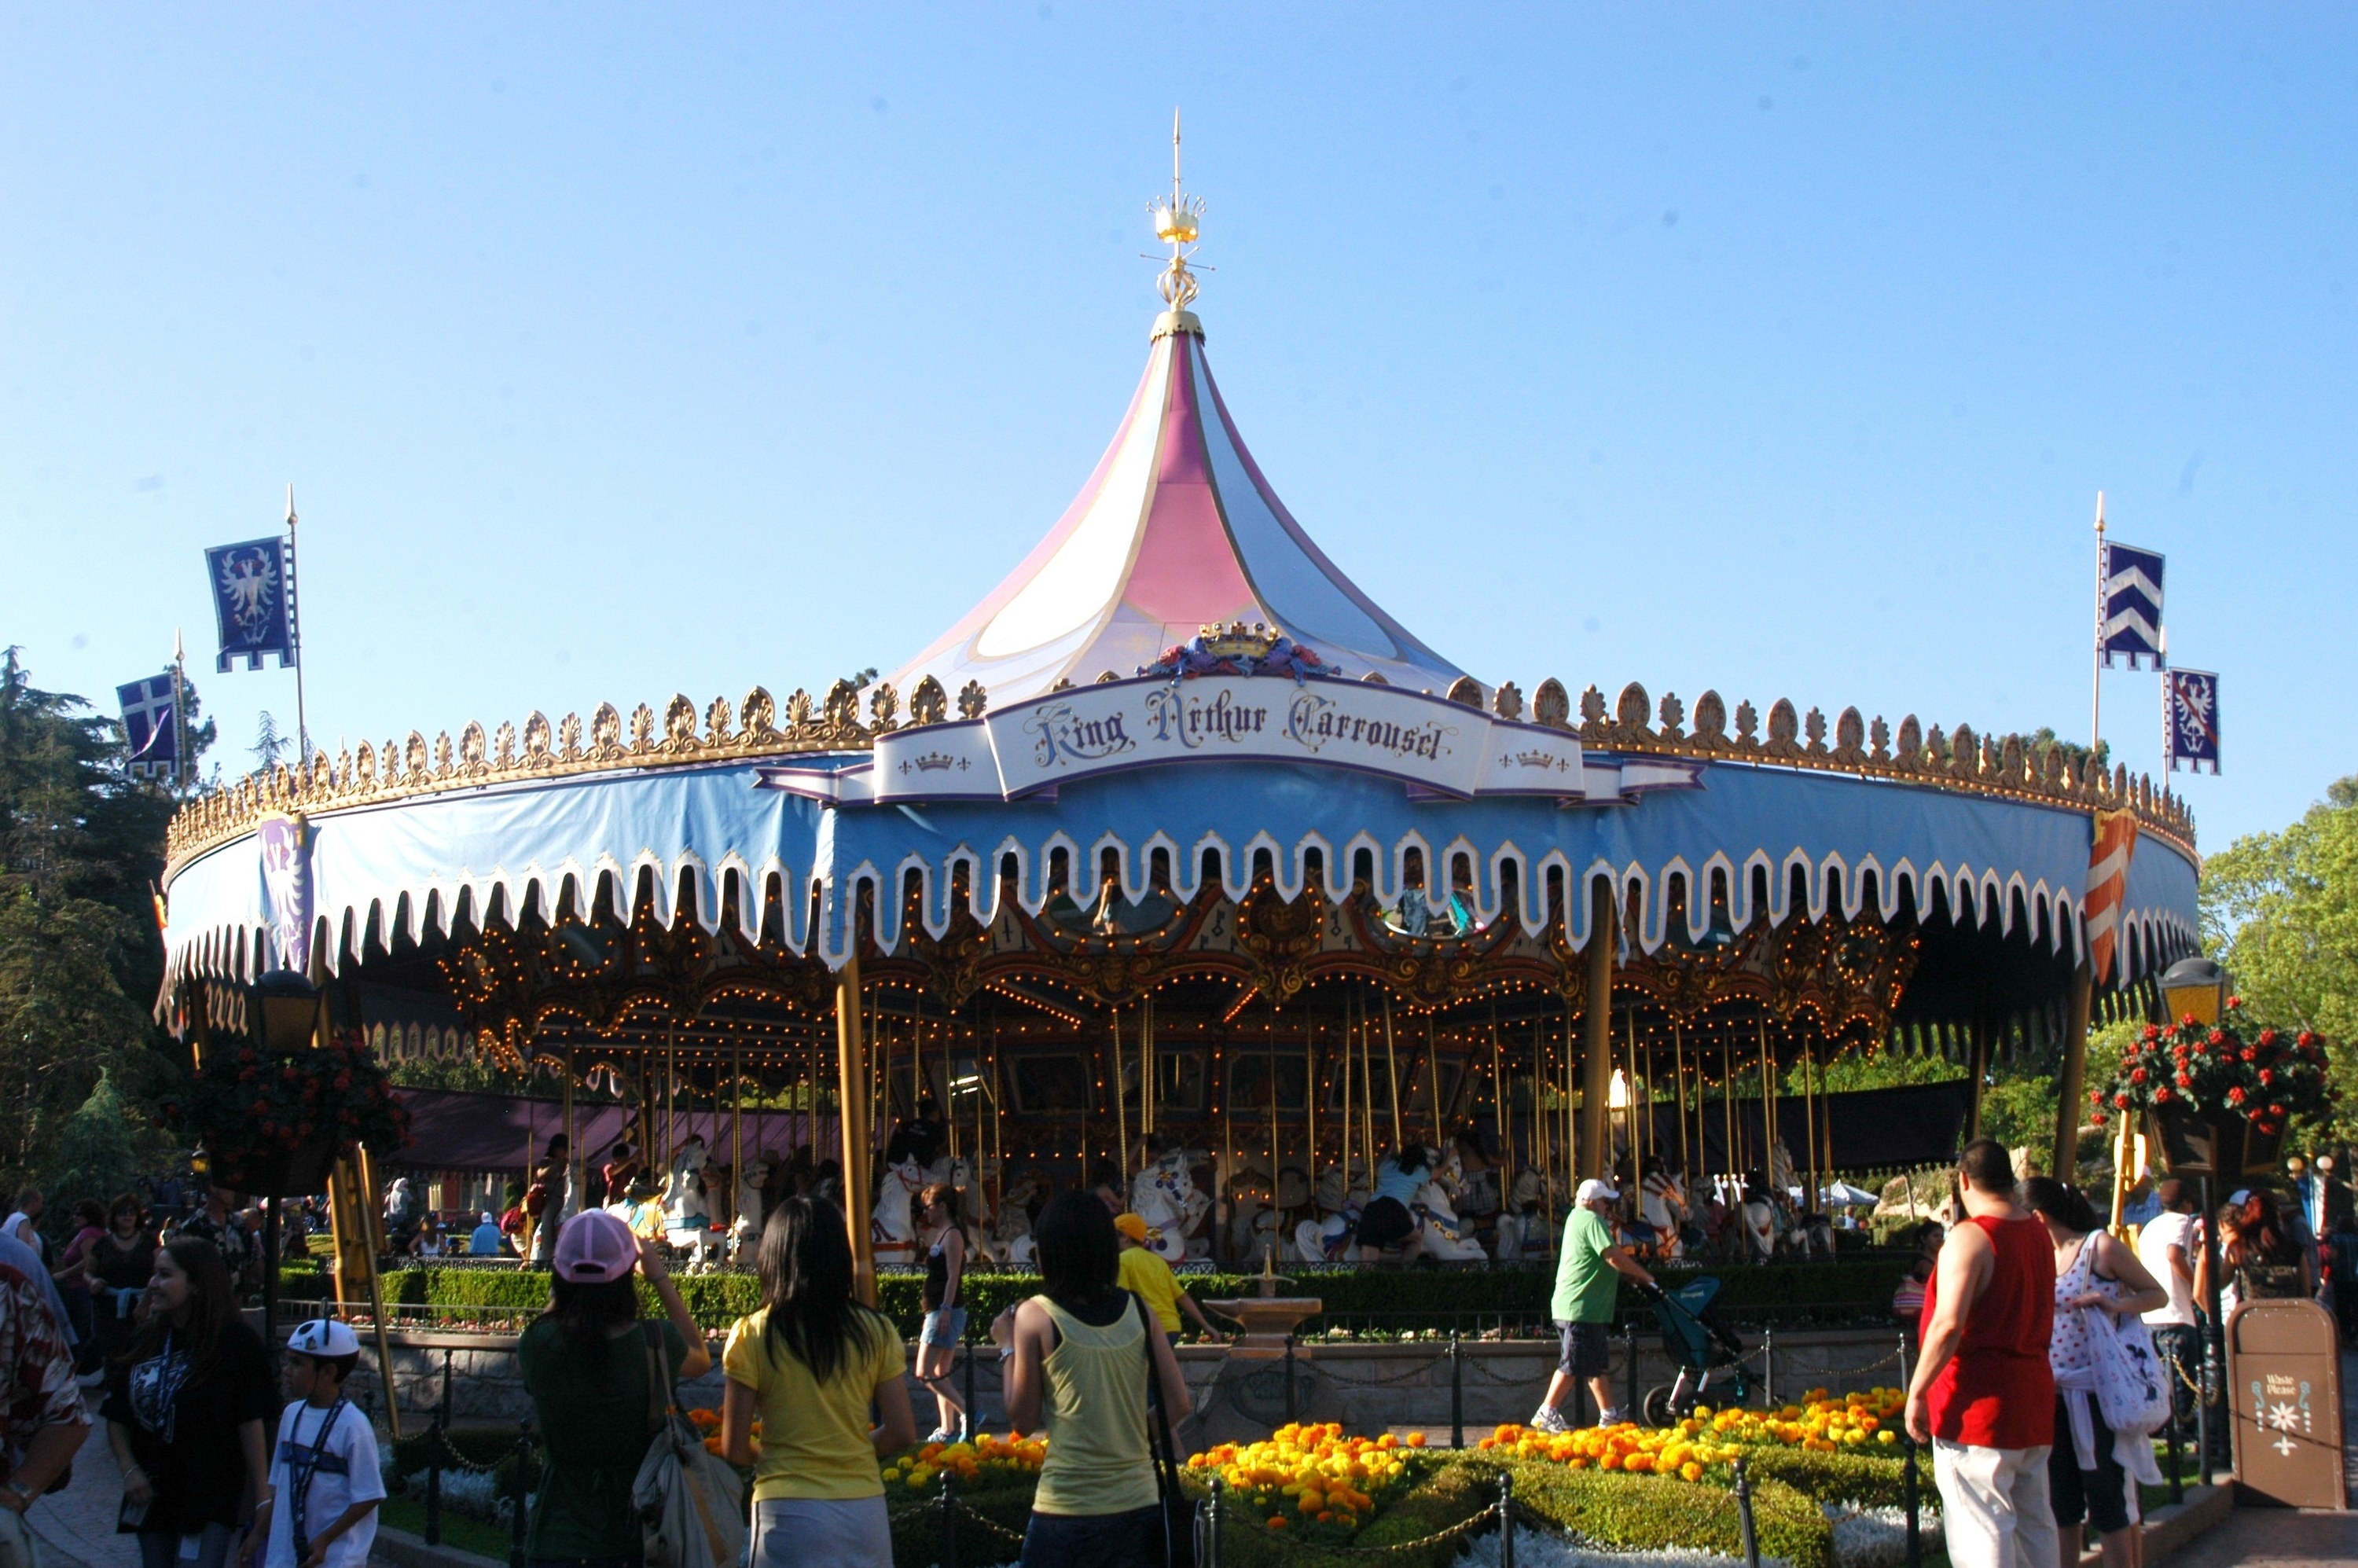 A photo of King Arthur Carousel during the day